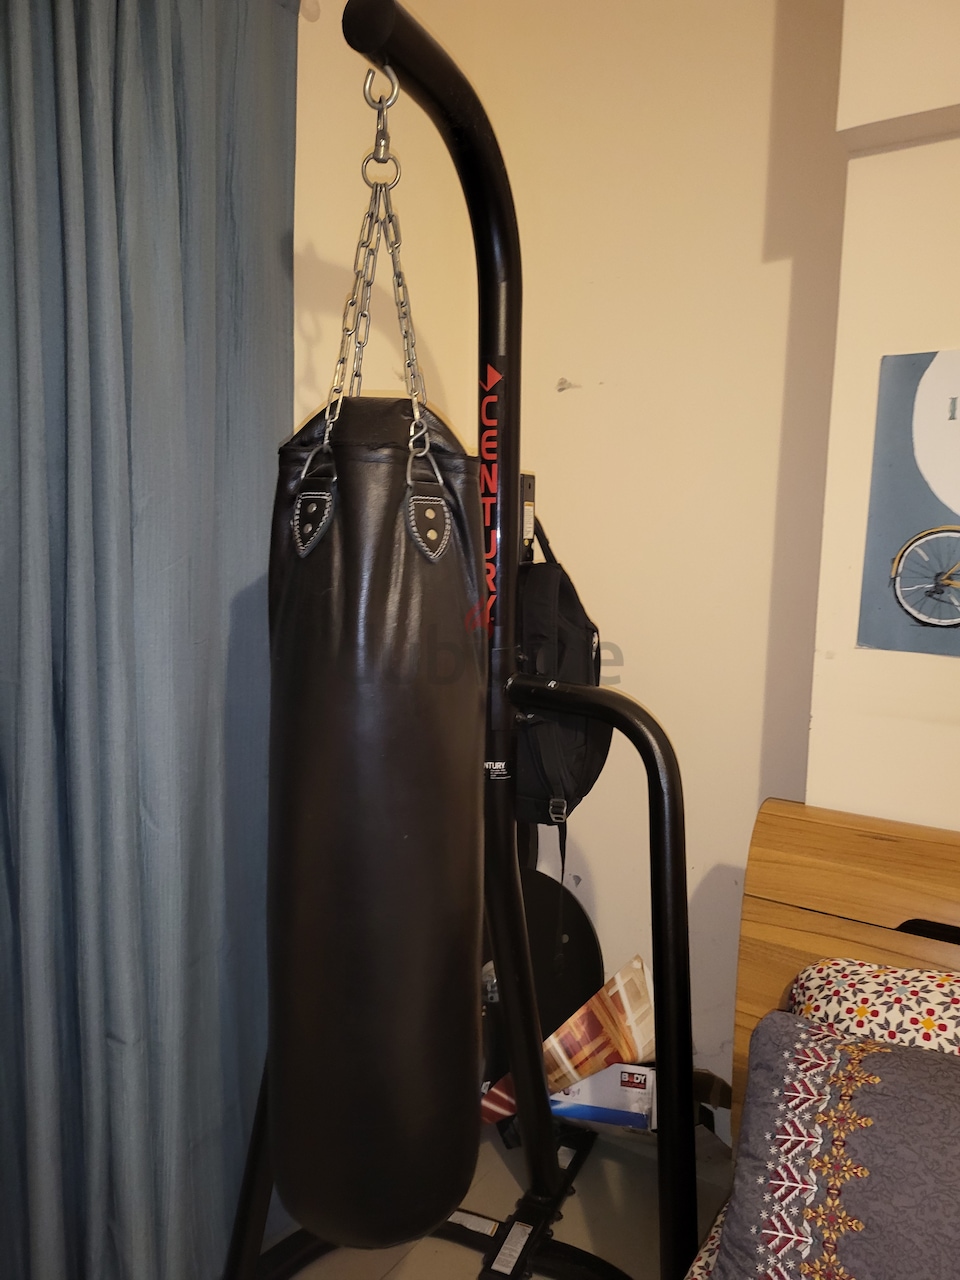 used punching bag | Boxing & Martial Arts | Gumtree Australia Free Local  Classifieds